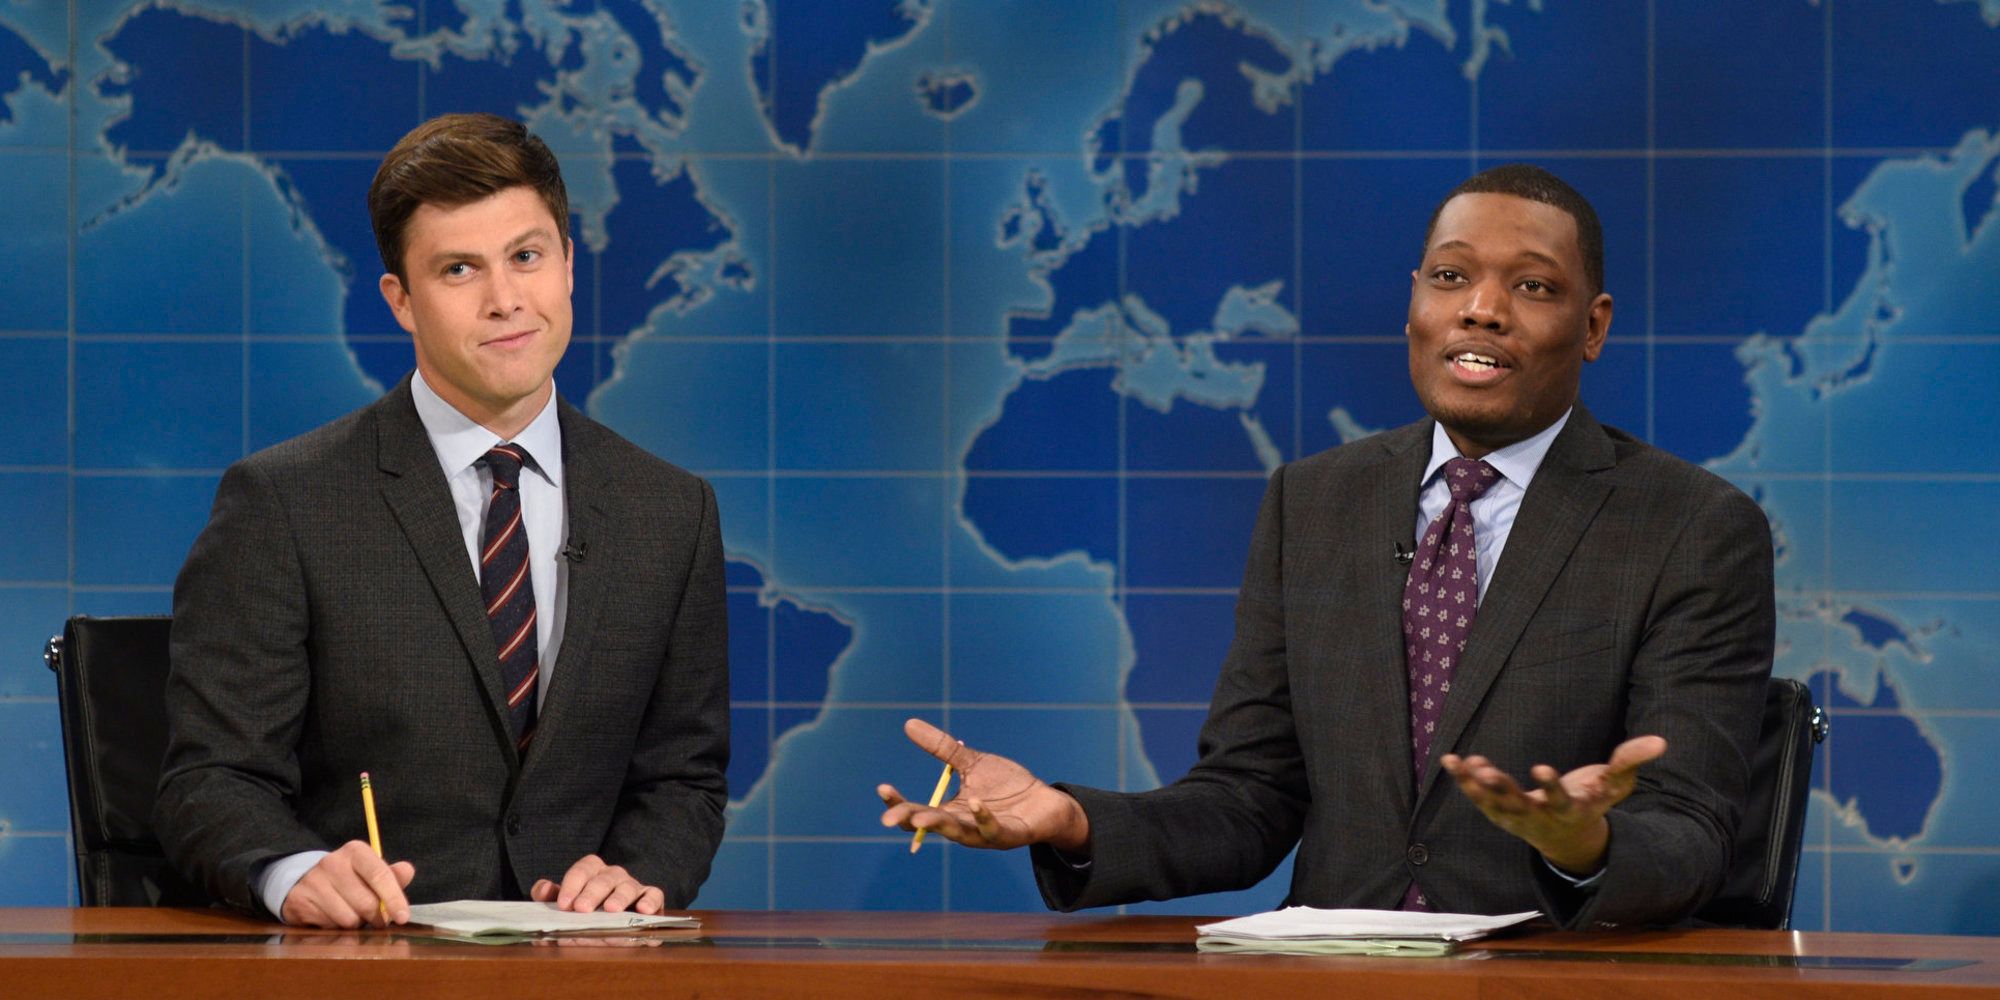 Colin Jost & Michael Che Named SNL CoHead Writers